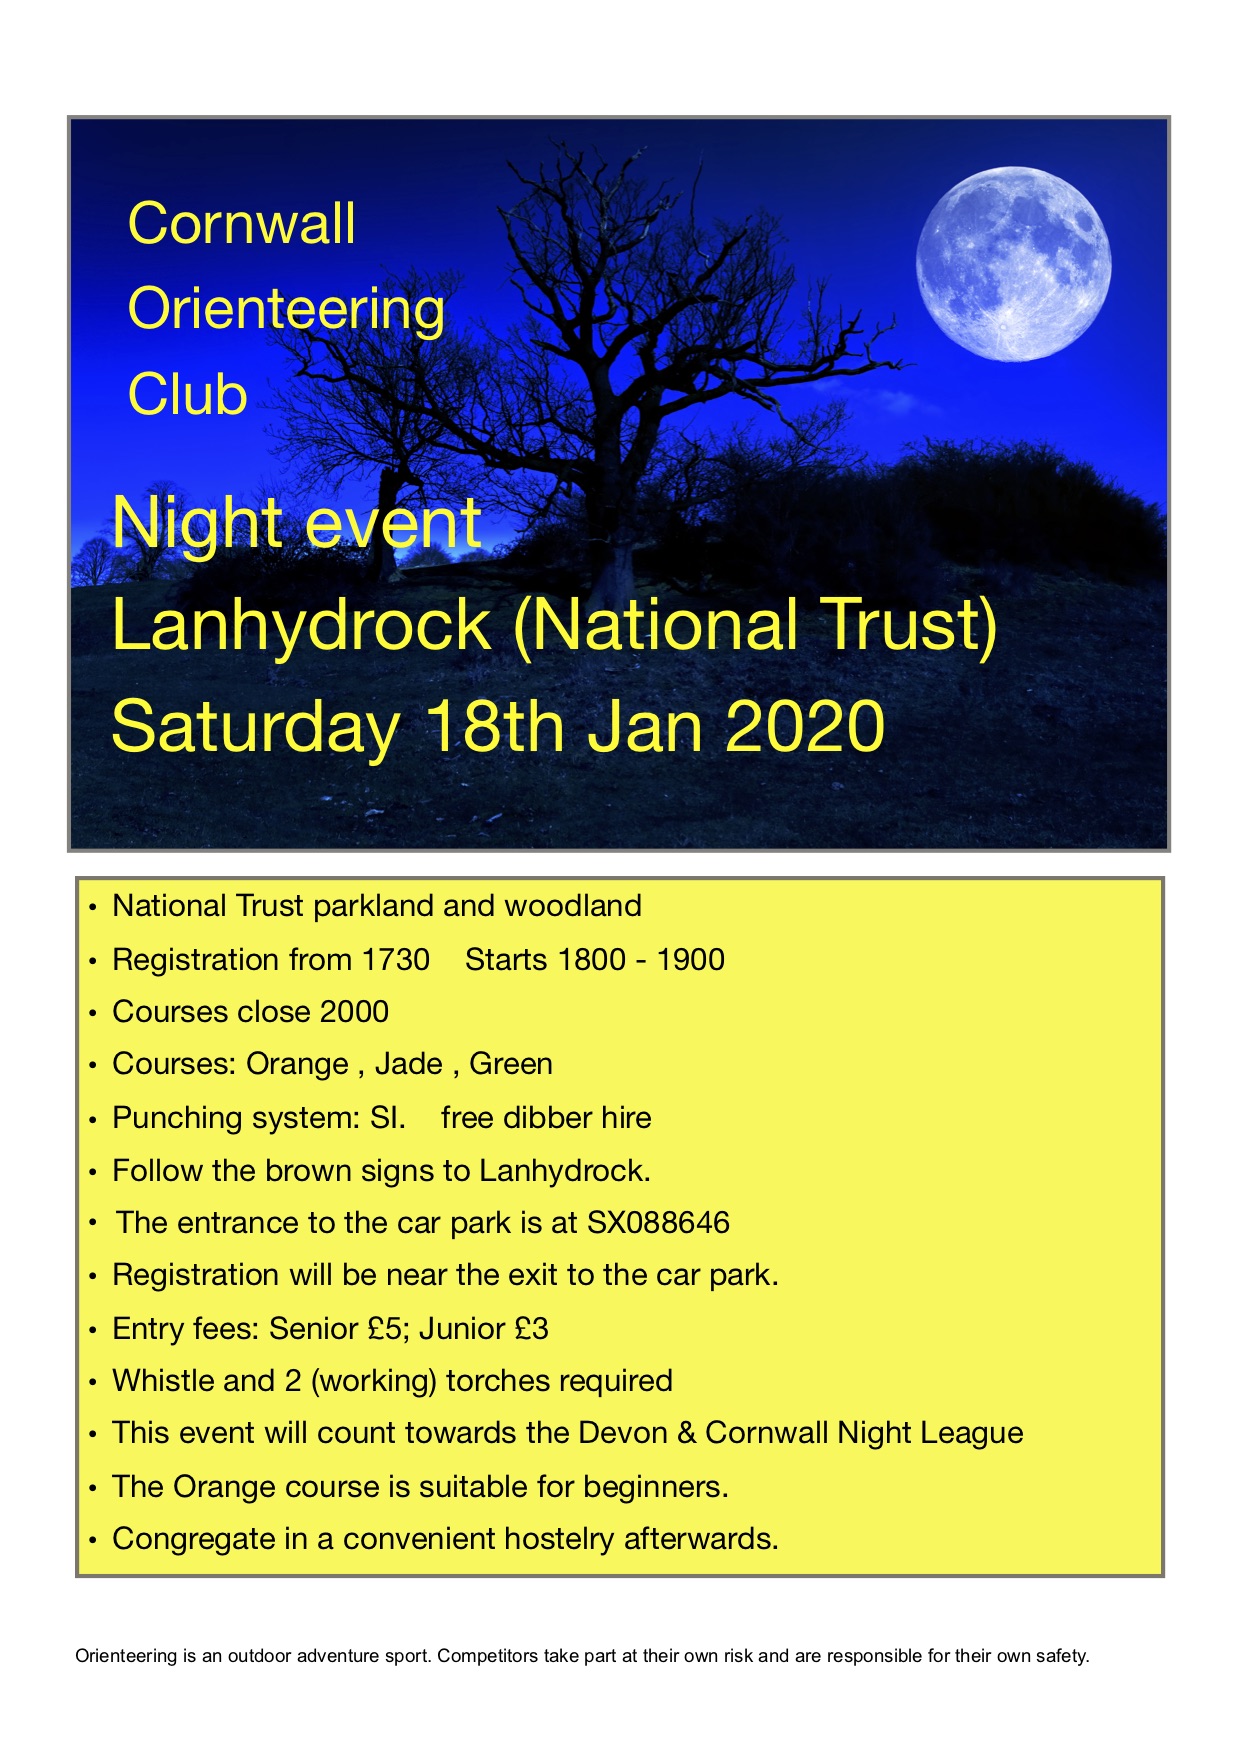 flyer for lanhydrock night event jan 2020